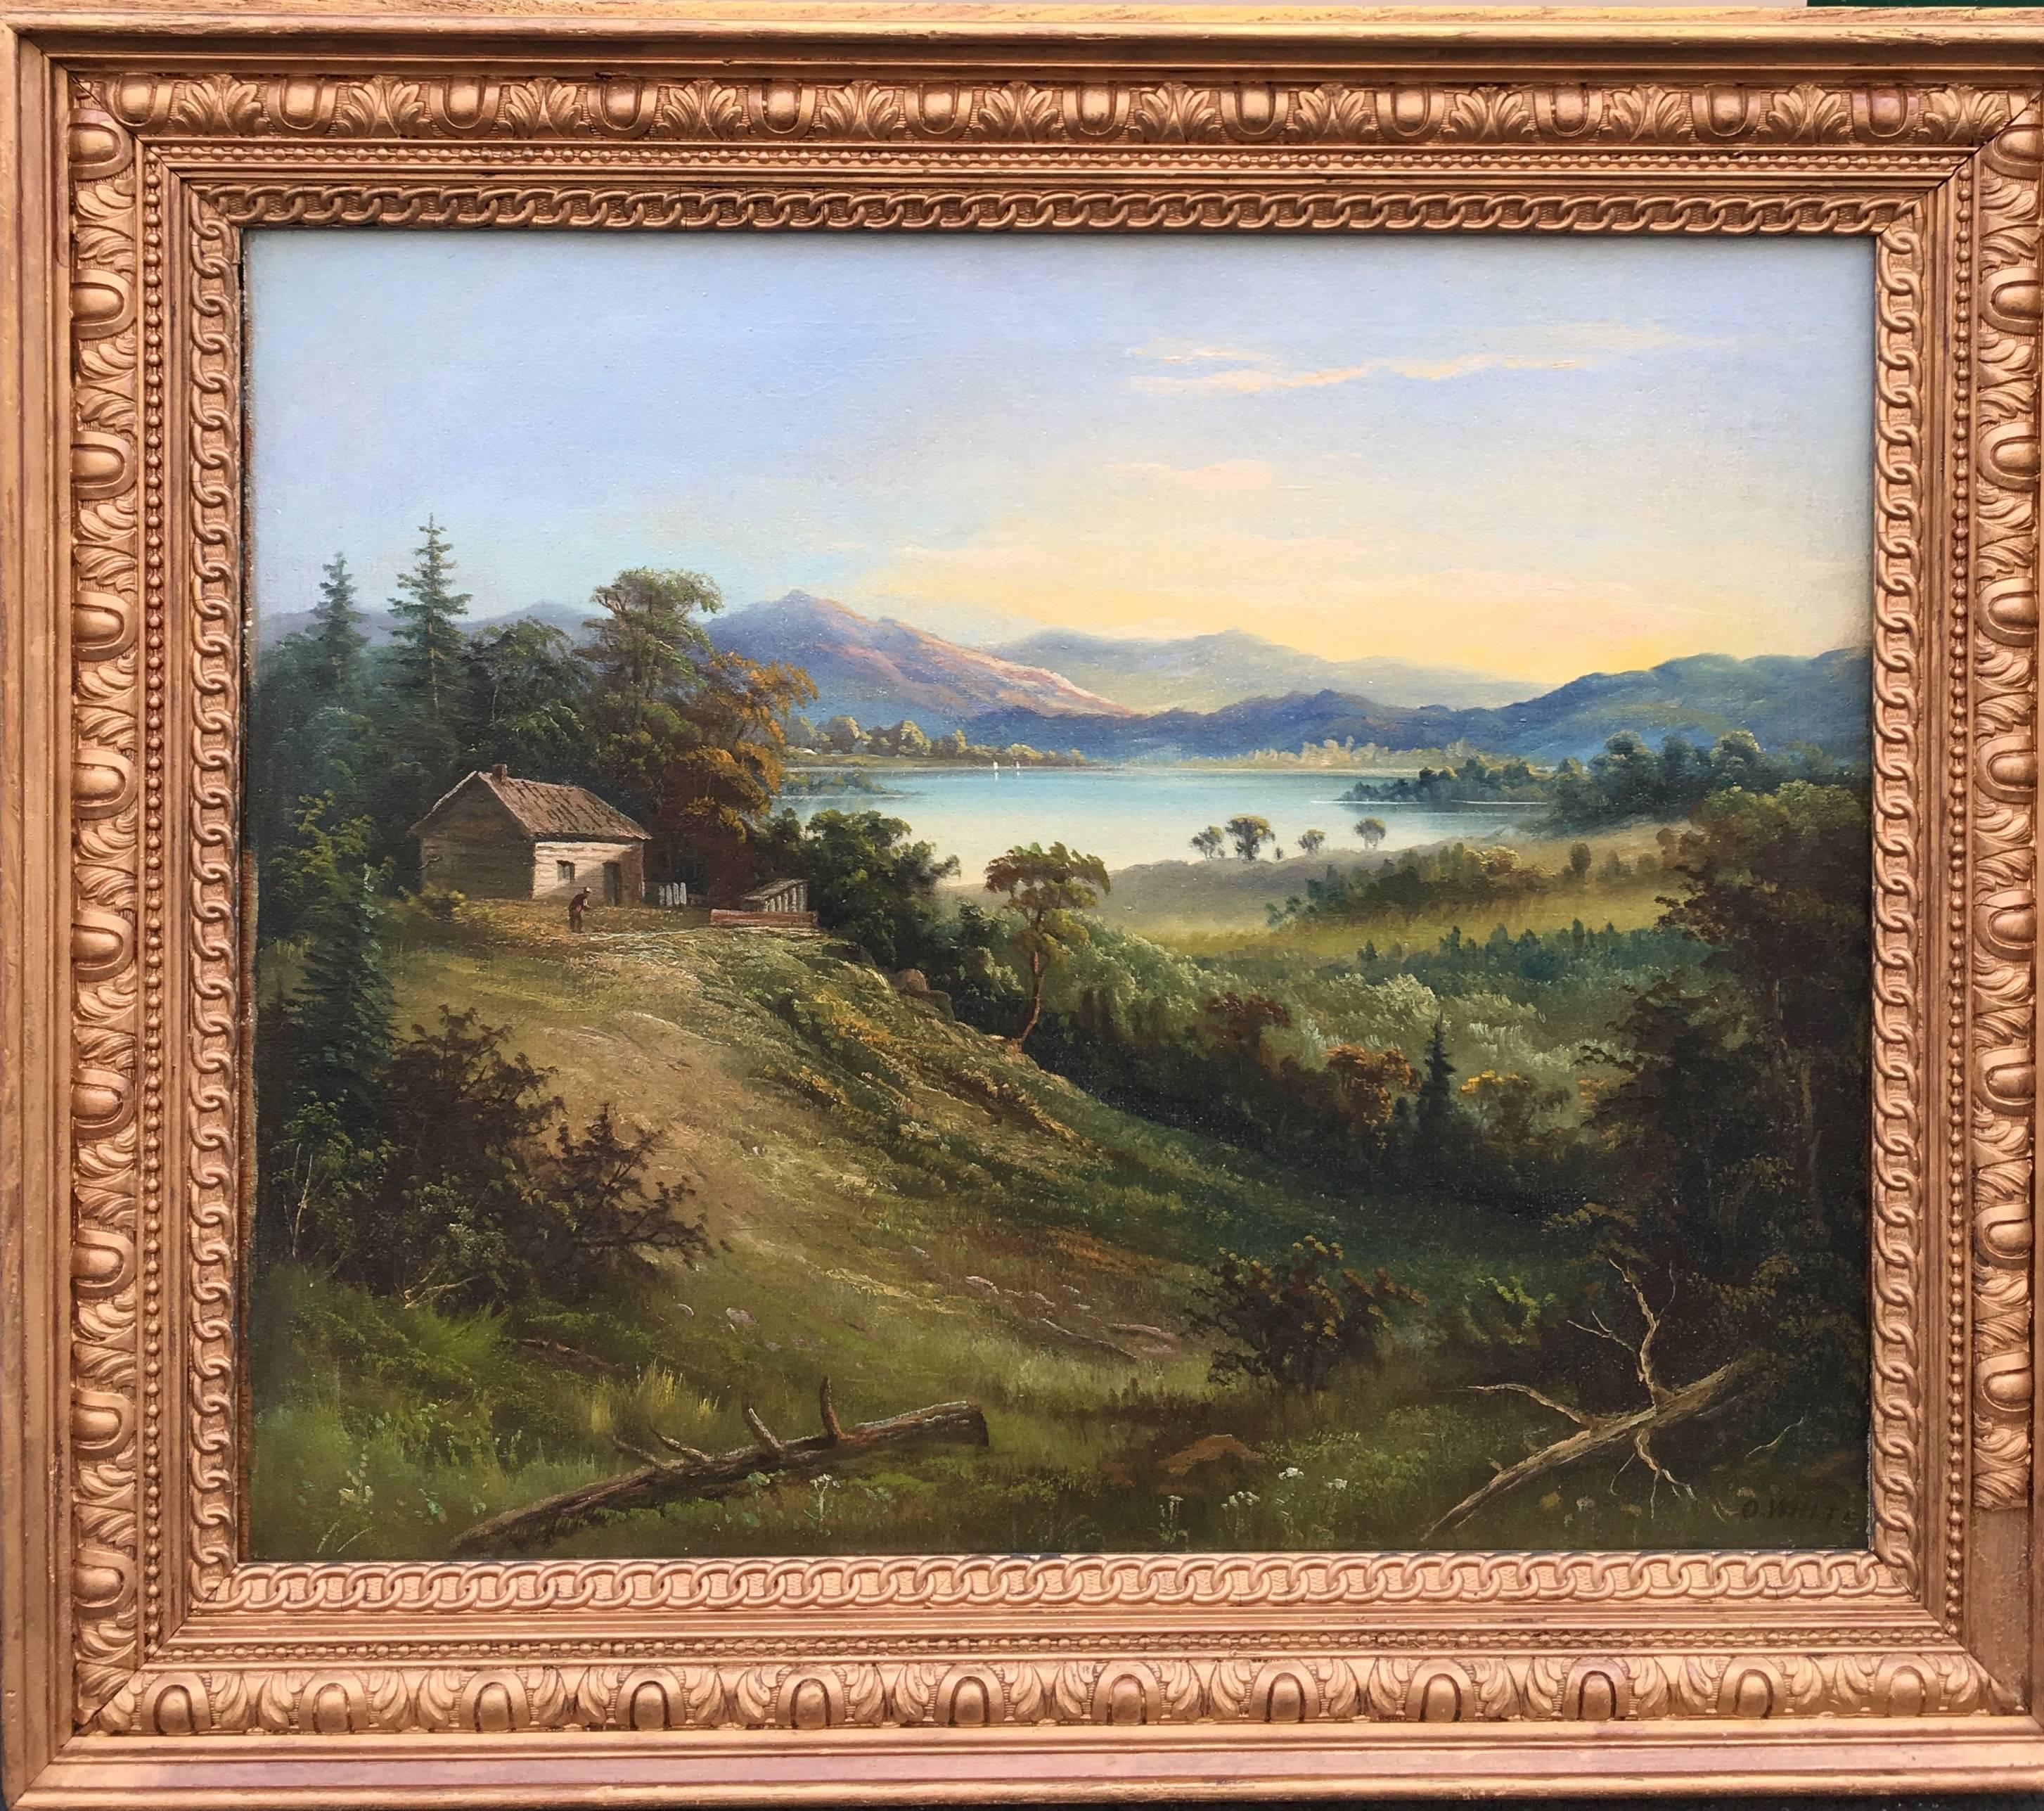 Octavius White Landscape Painting - Canadian Landscape with Log Cabin and Frontiersmen